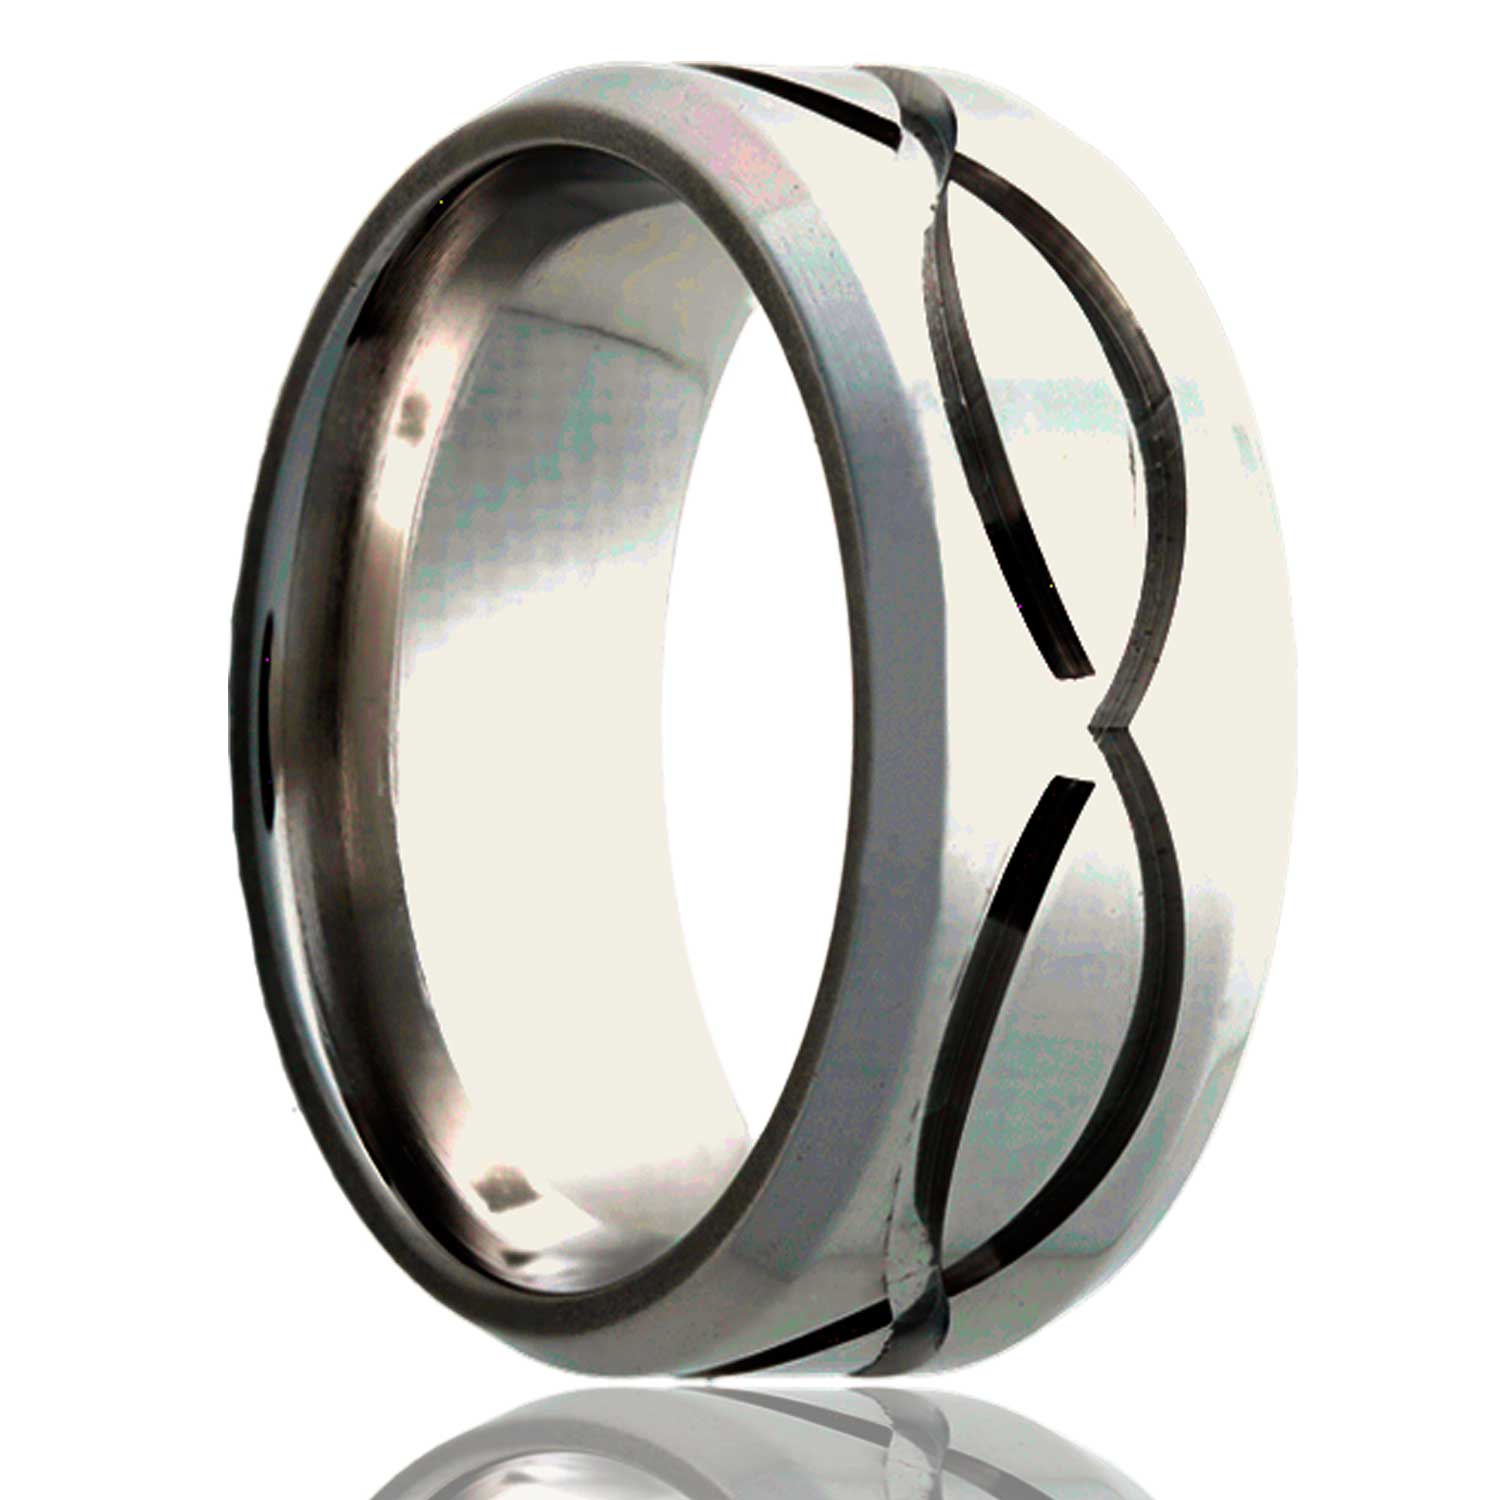 A infinity waves platinum wedding band with beveled edges displayed on a neutral white background.